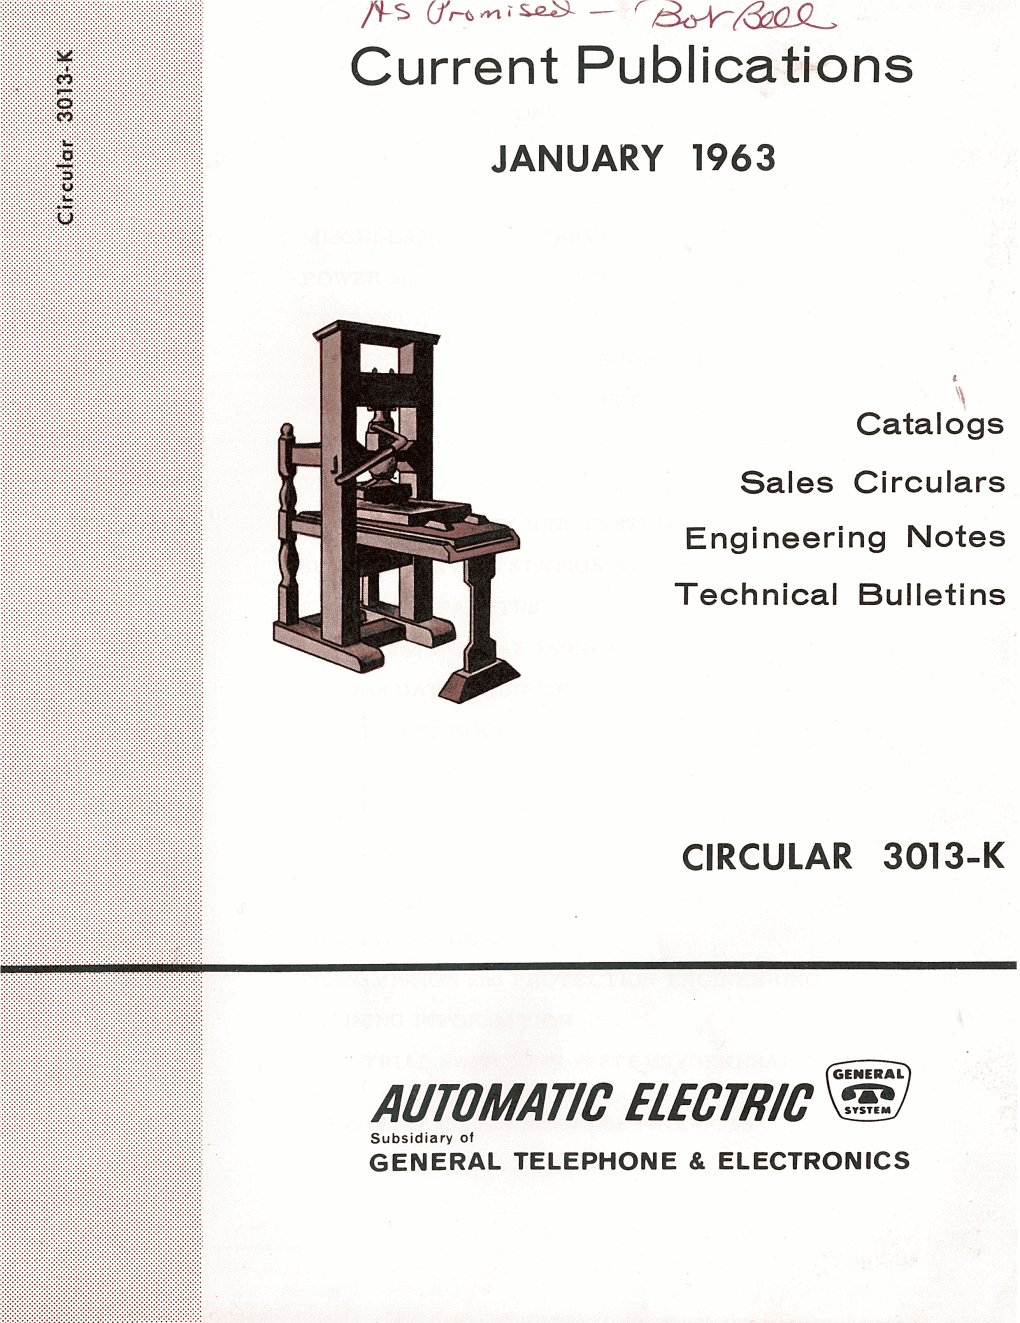 AUTOMATIC ELECTRIC ~ Subsidiary of GENERAL TELEPHONE & ELECTRONICS